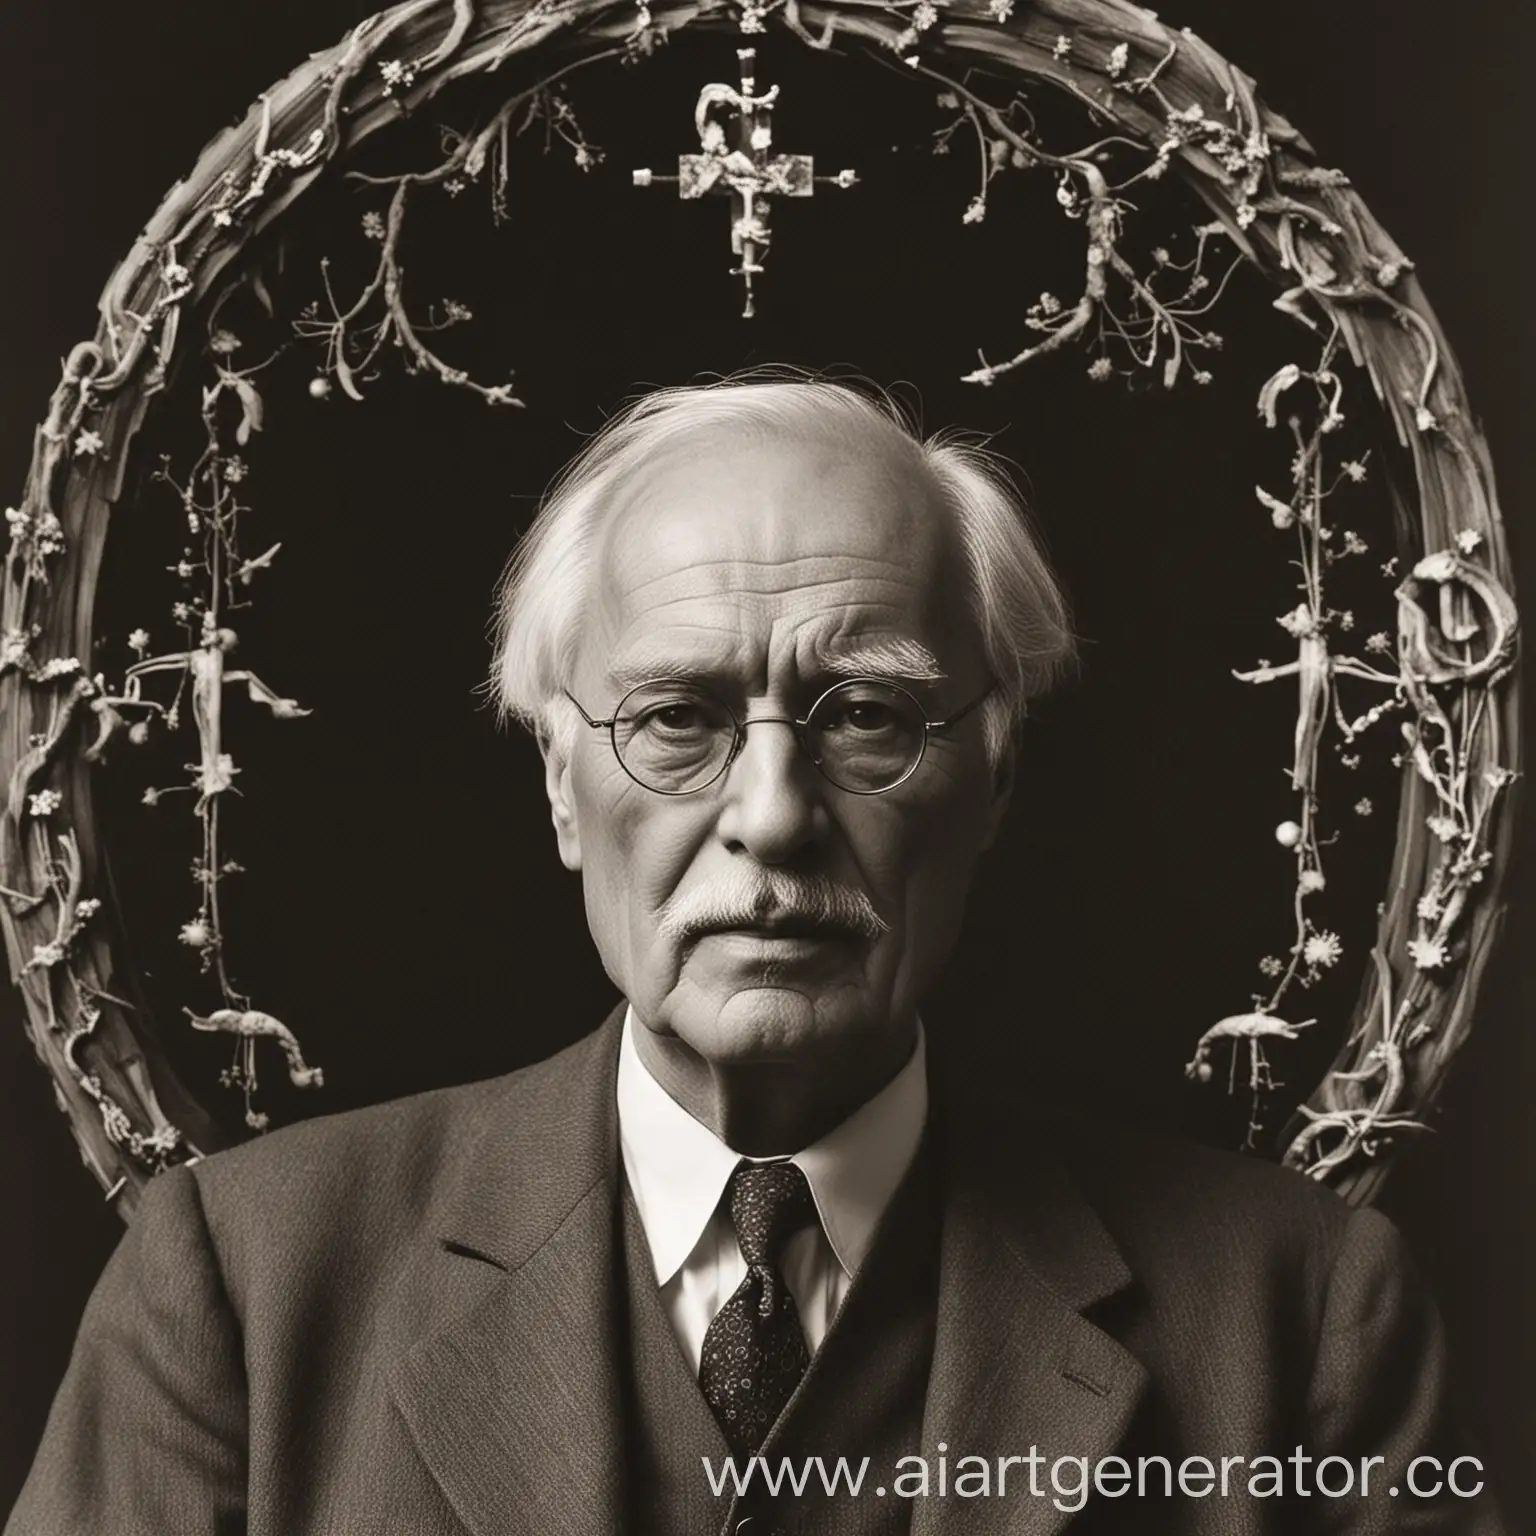 The philosophical perspective on religion by C.G. Jung